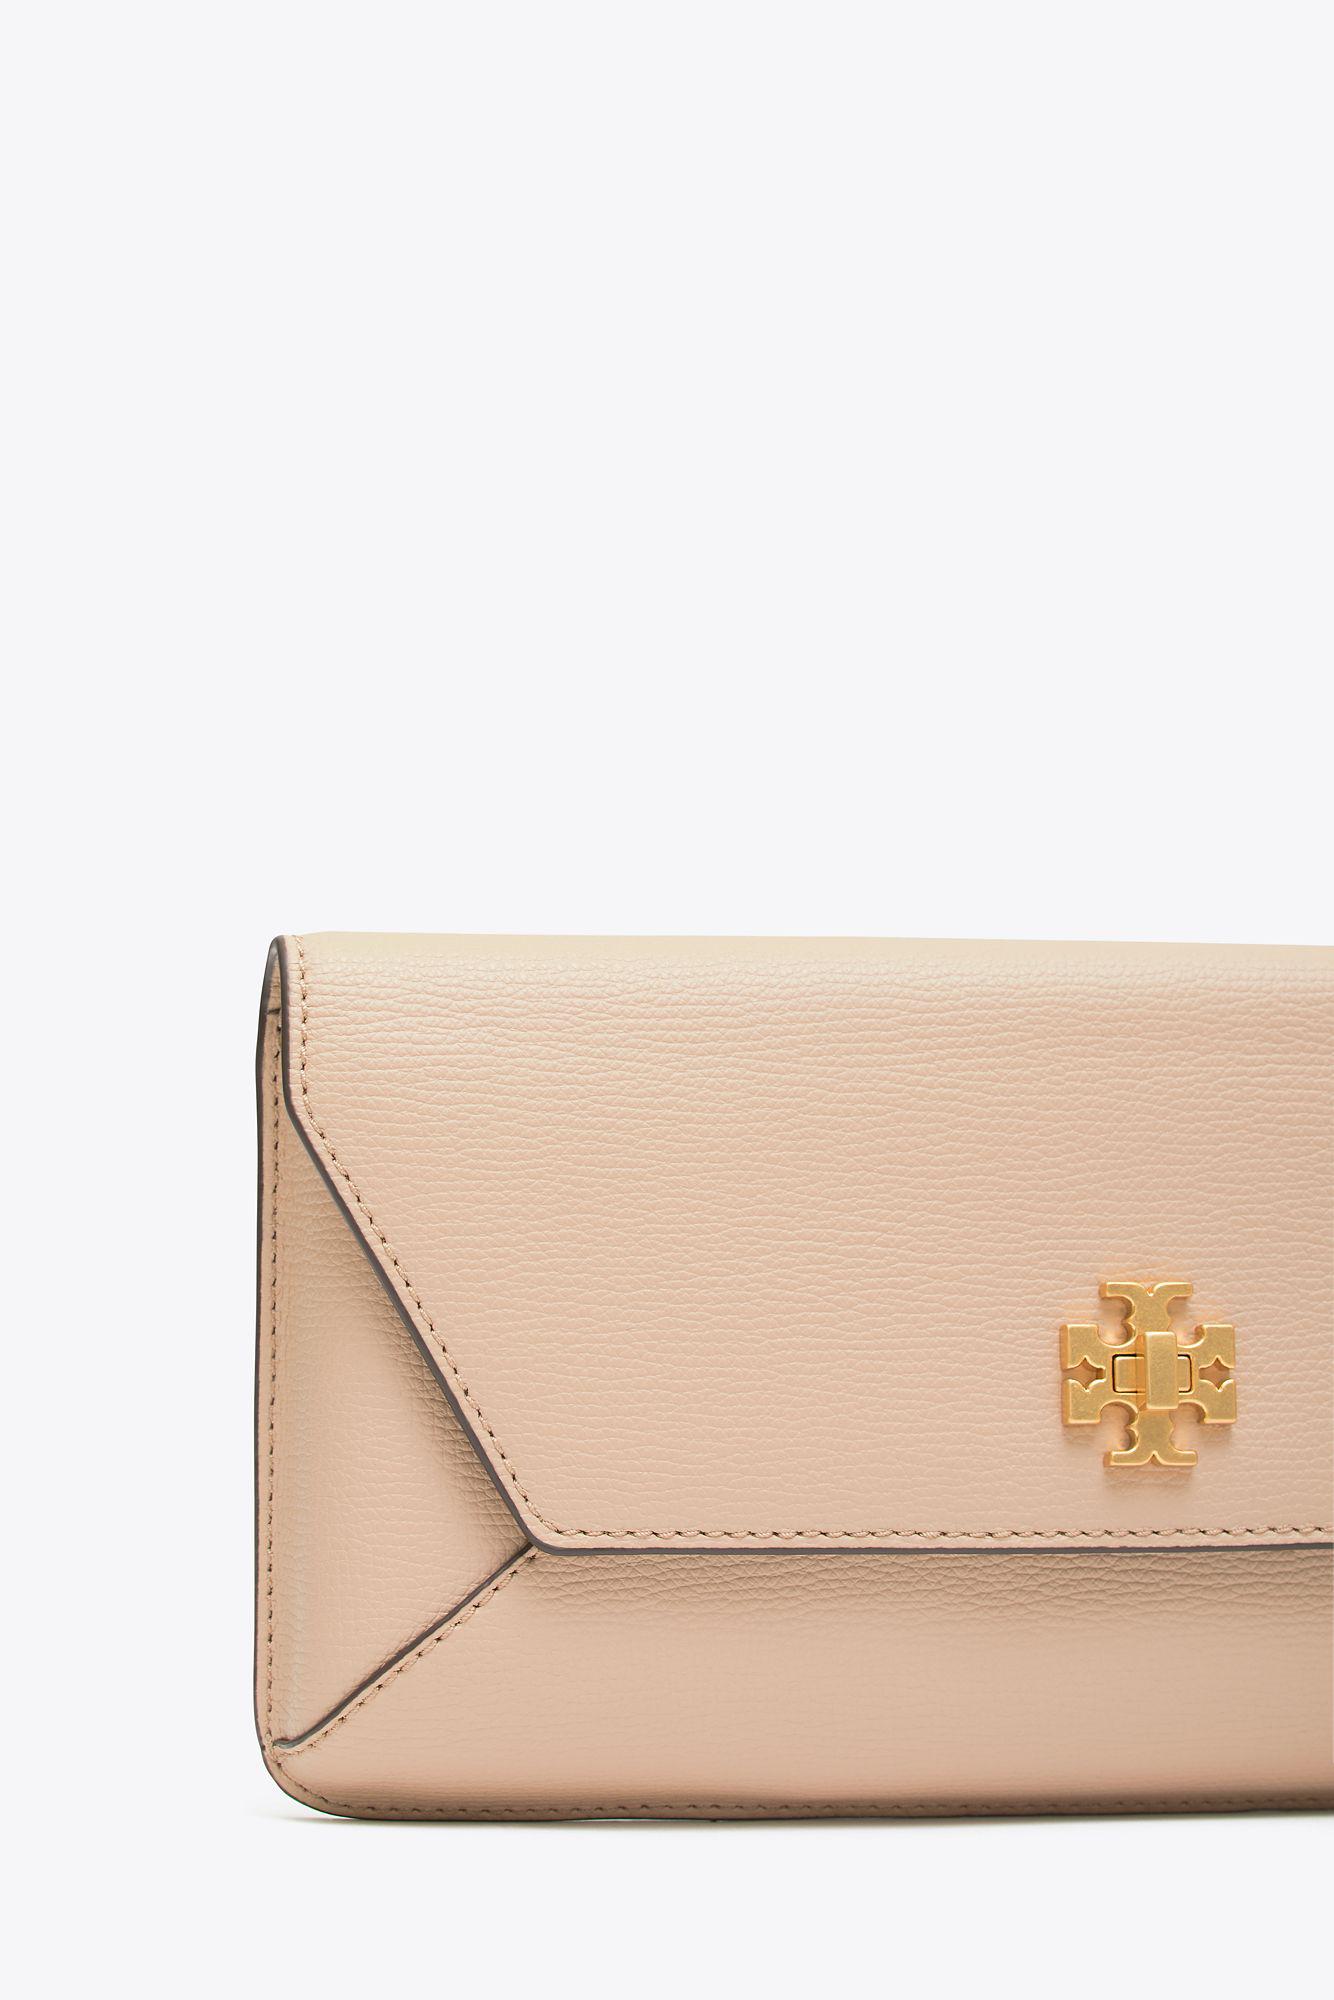 Tory Burch Leather Kira Envelope Clutch in Natural | Lyst